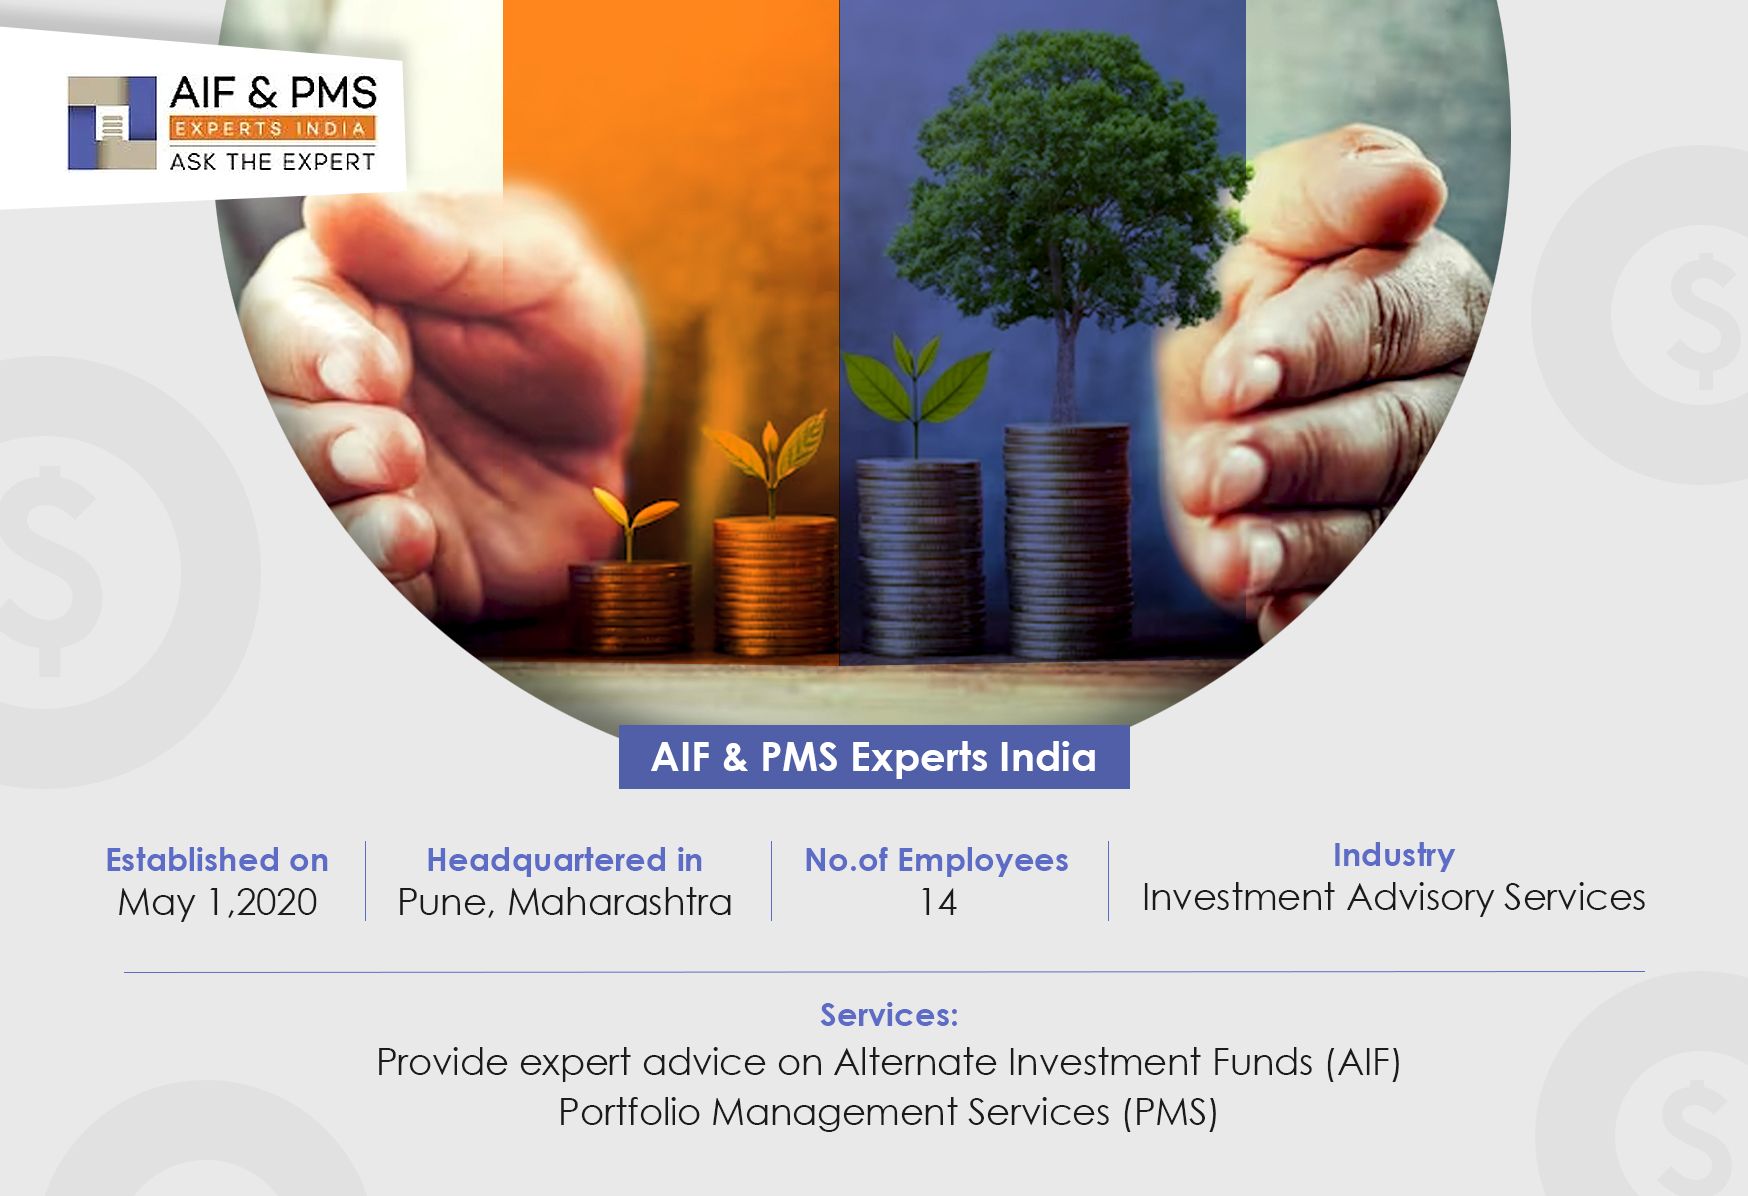 About AIF & PMS Experts India